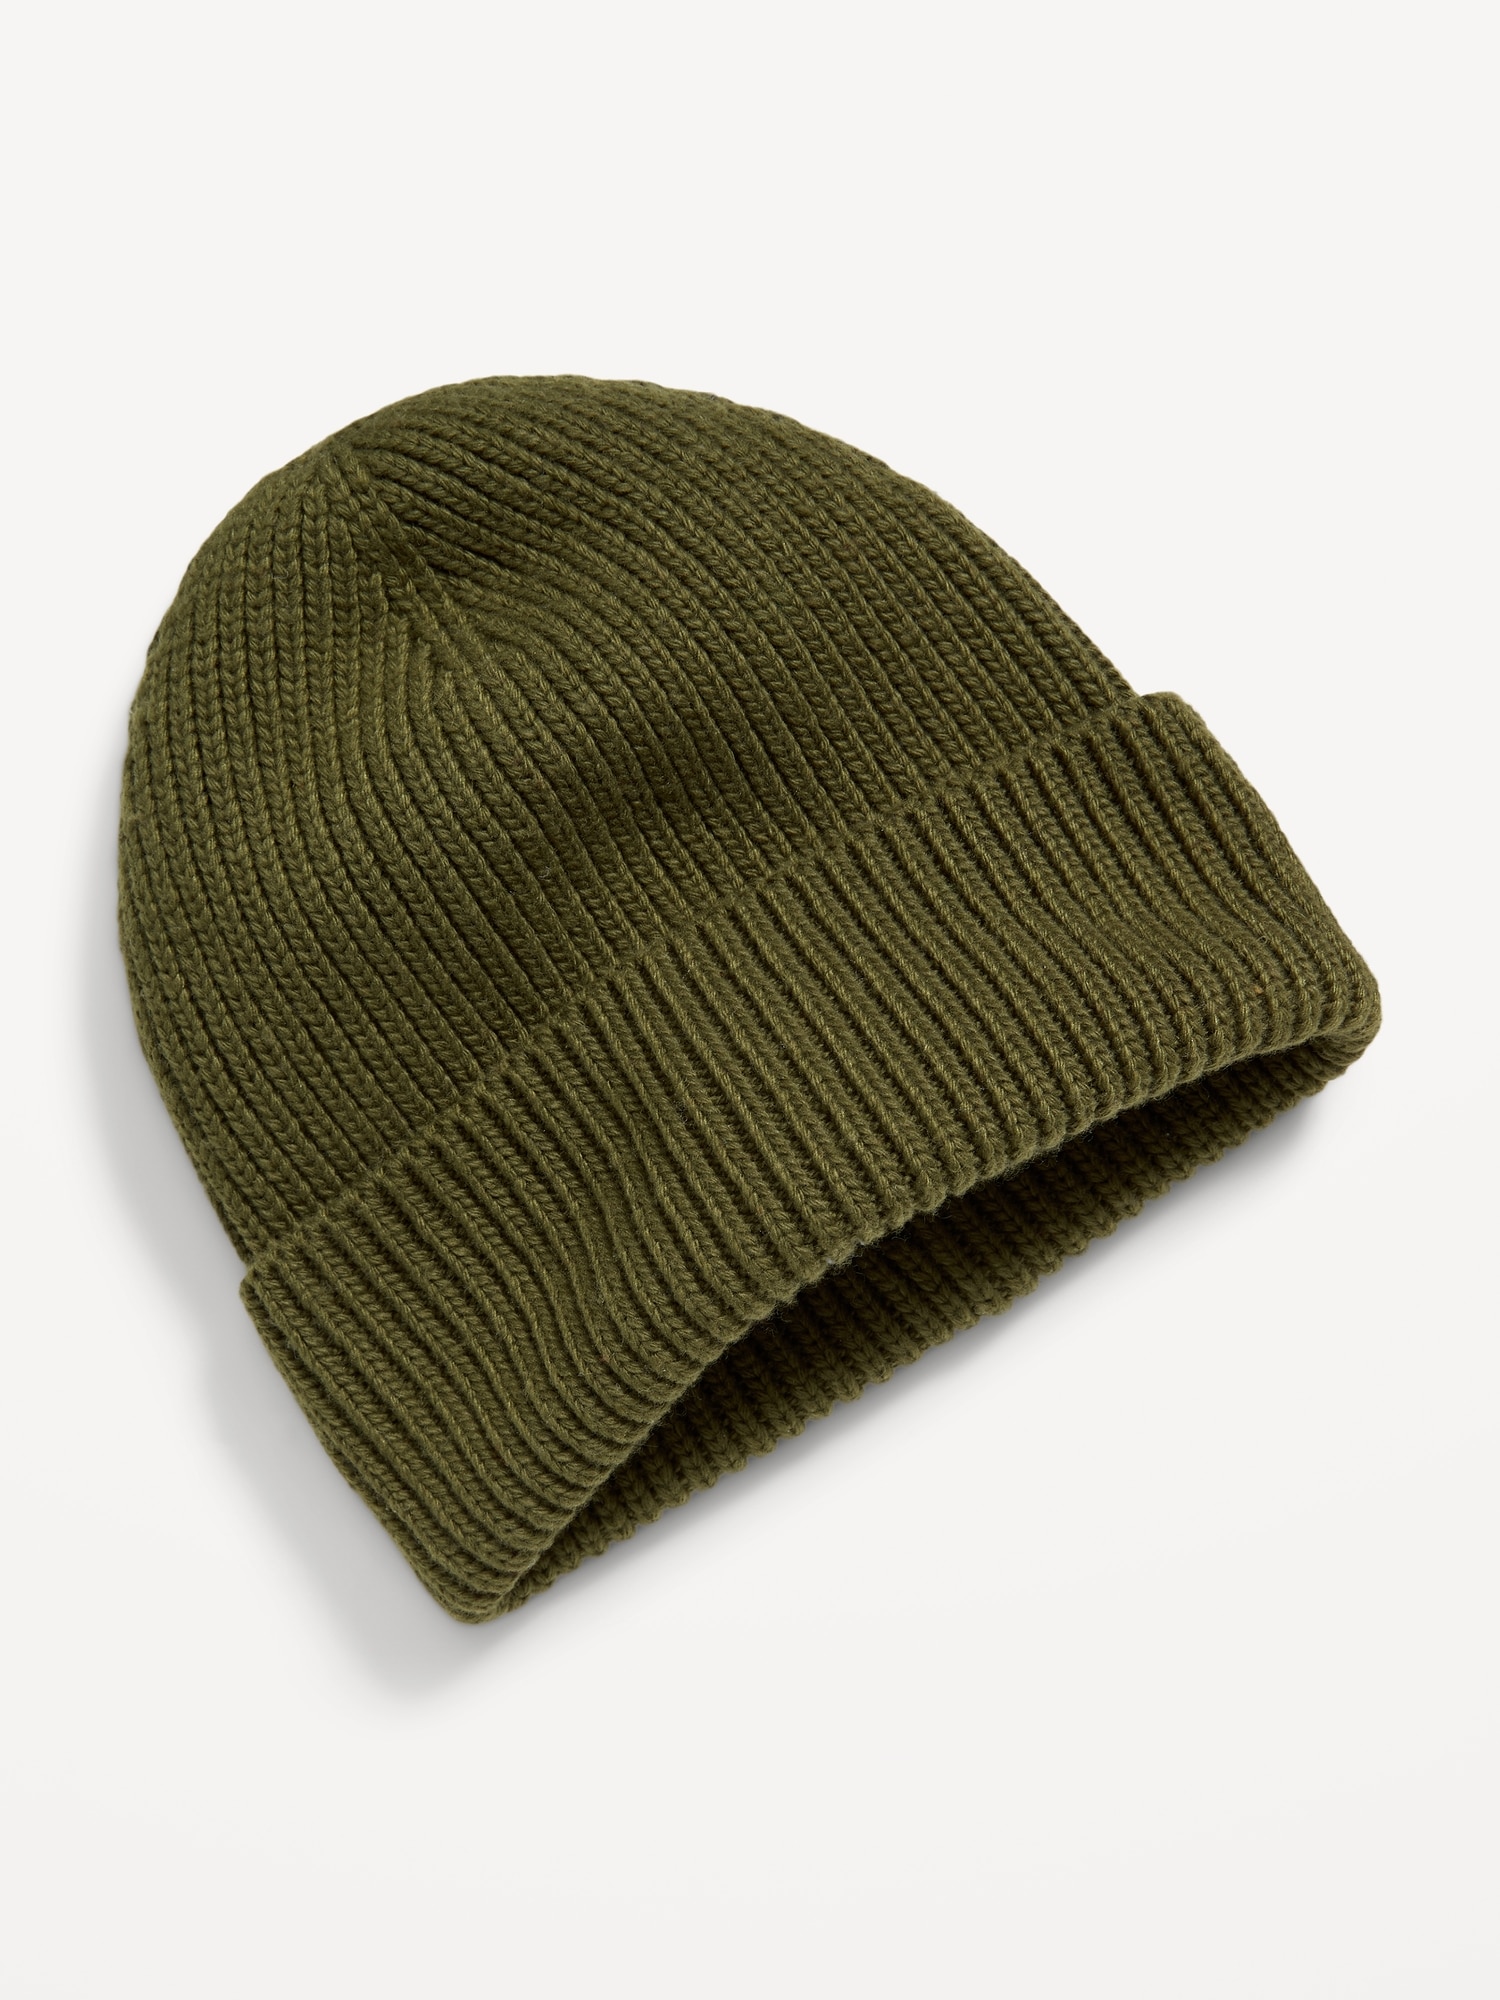 Gender-Neutral Rib-Knit Beanie for Adults Old Navy 